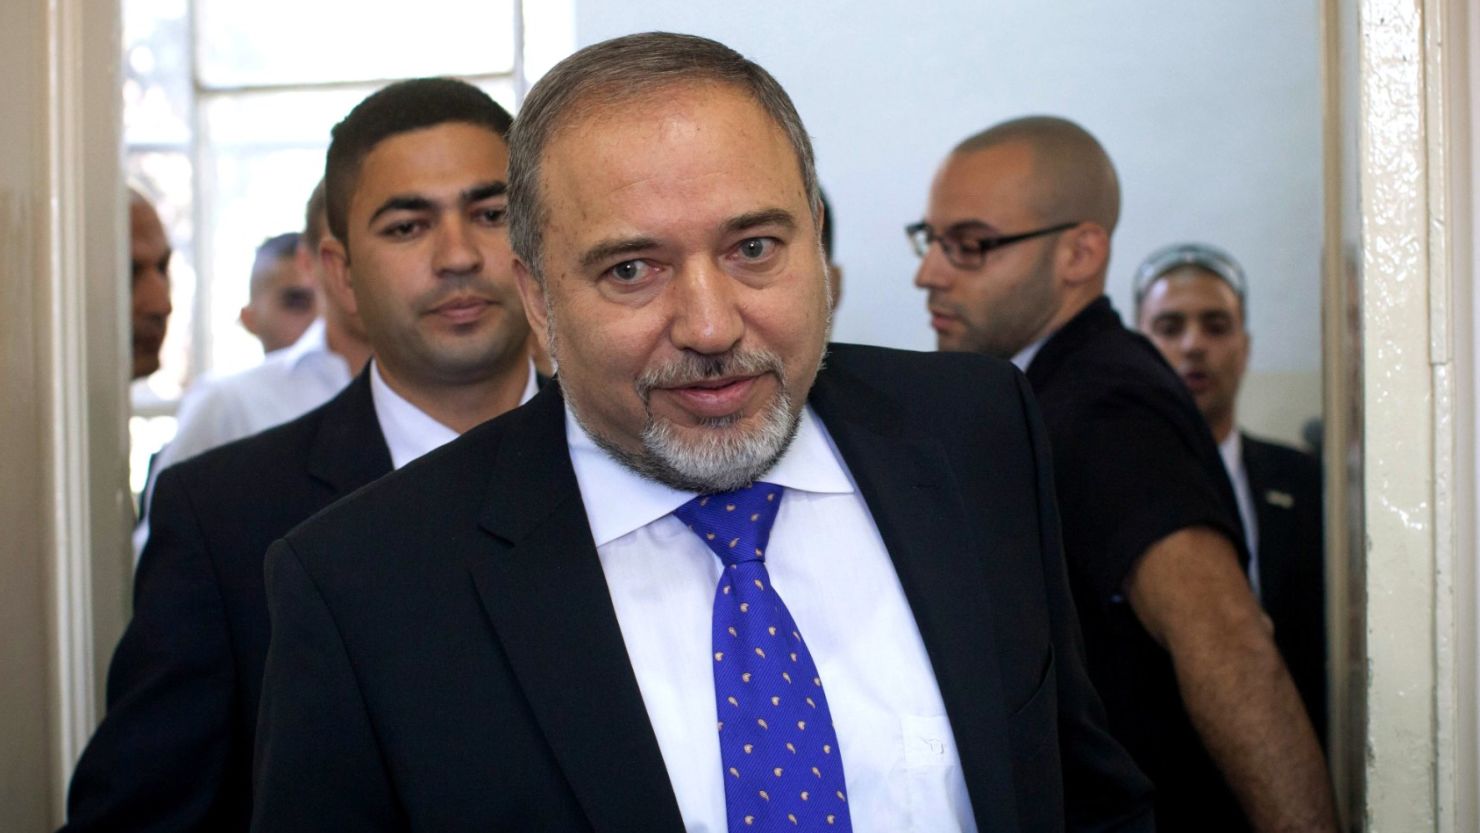 Of the 120-seat Knesset, 55 members voted in favor of Avigdor Liberman's appointment, while 43 voted against. 